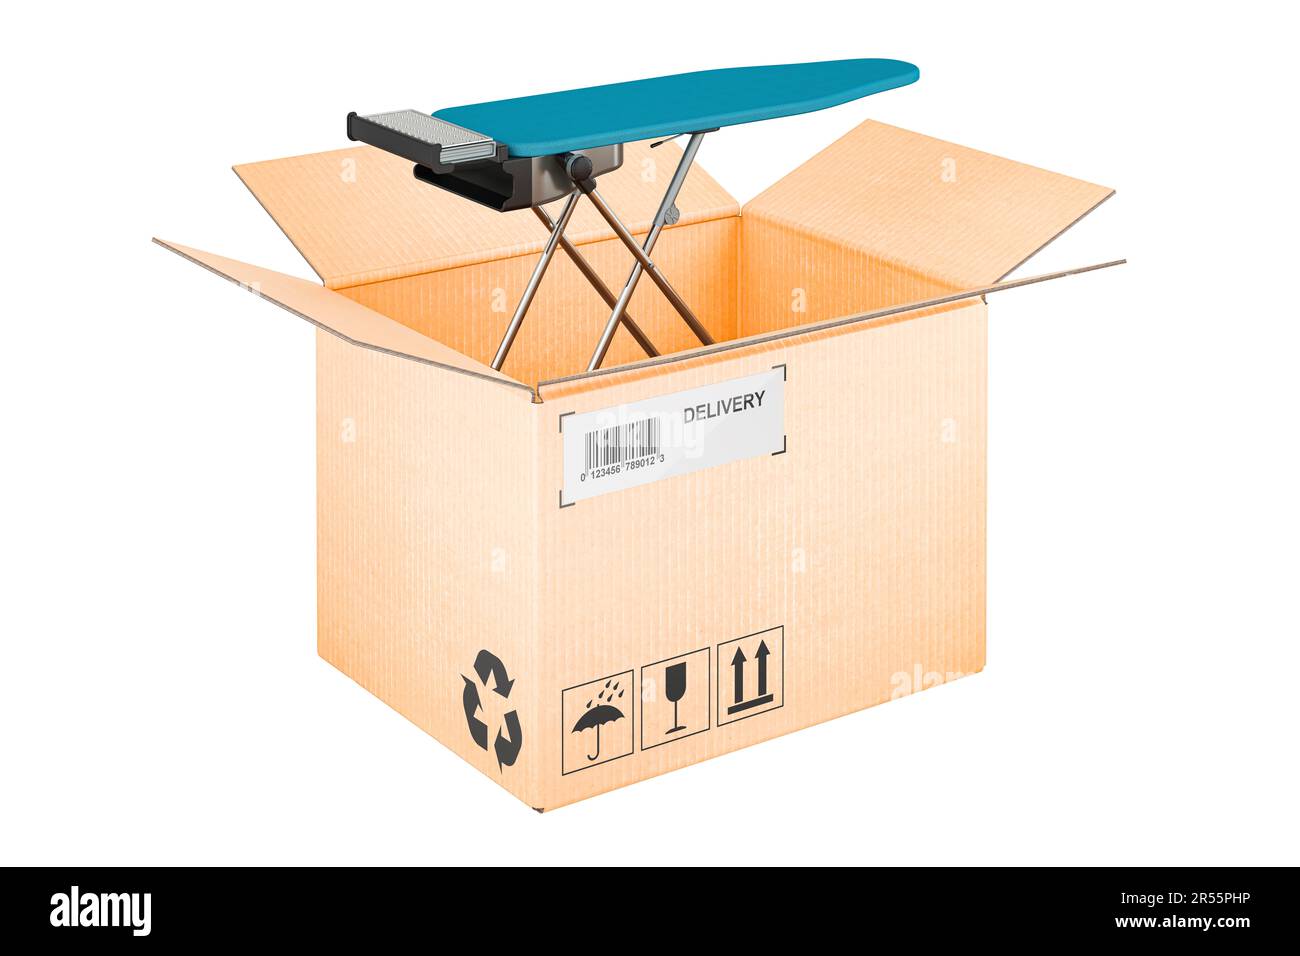 Ironing Board inside cardboard box, delivery concept, 3D rendering isolated on white background Stock Photo